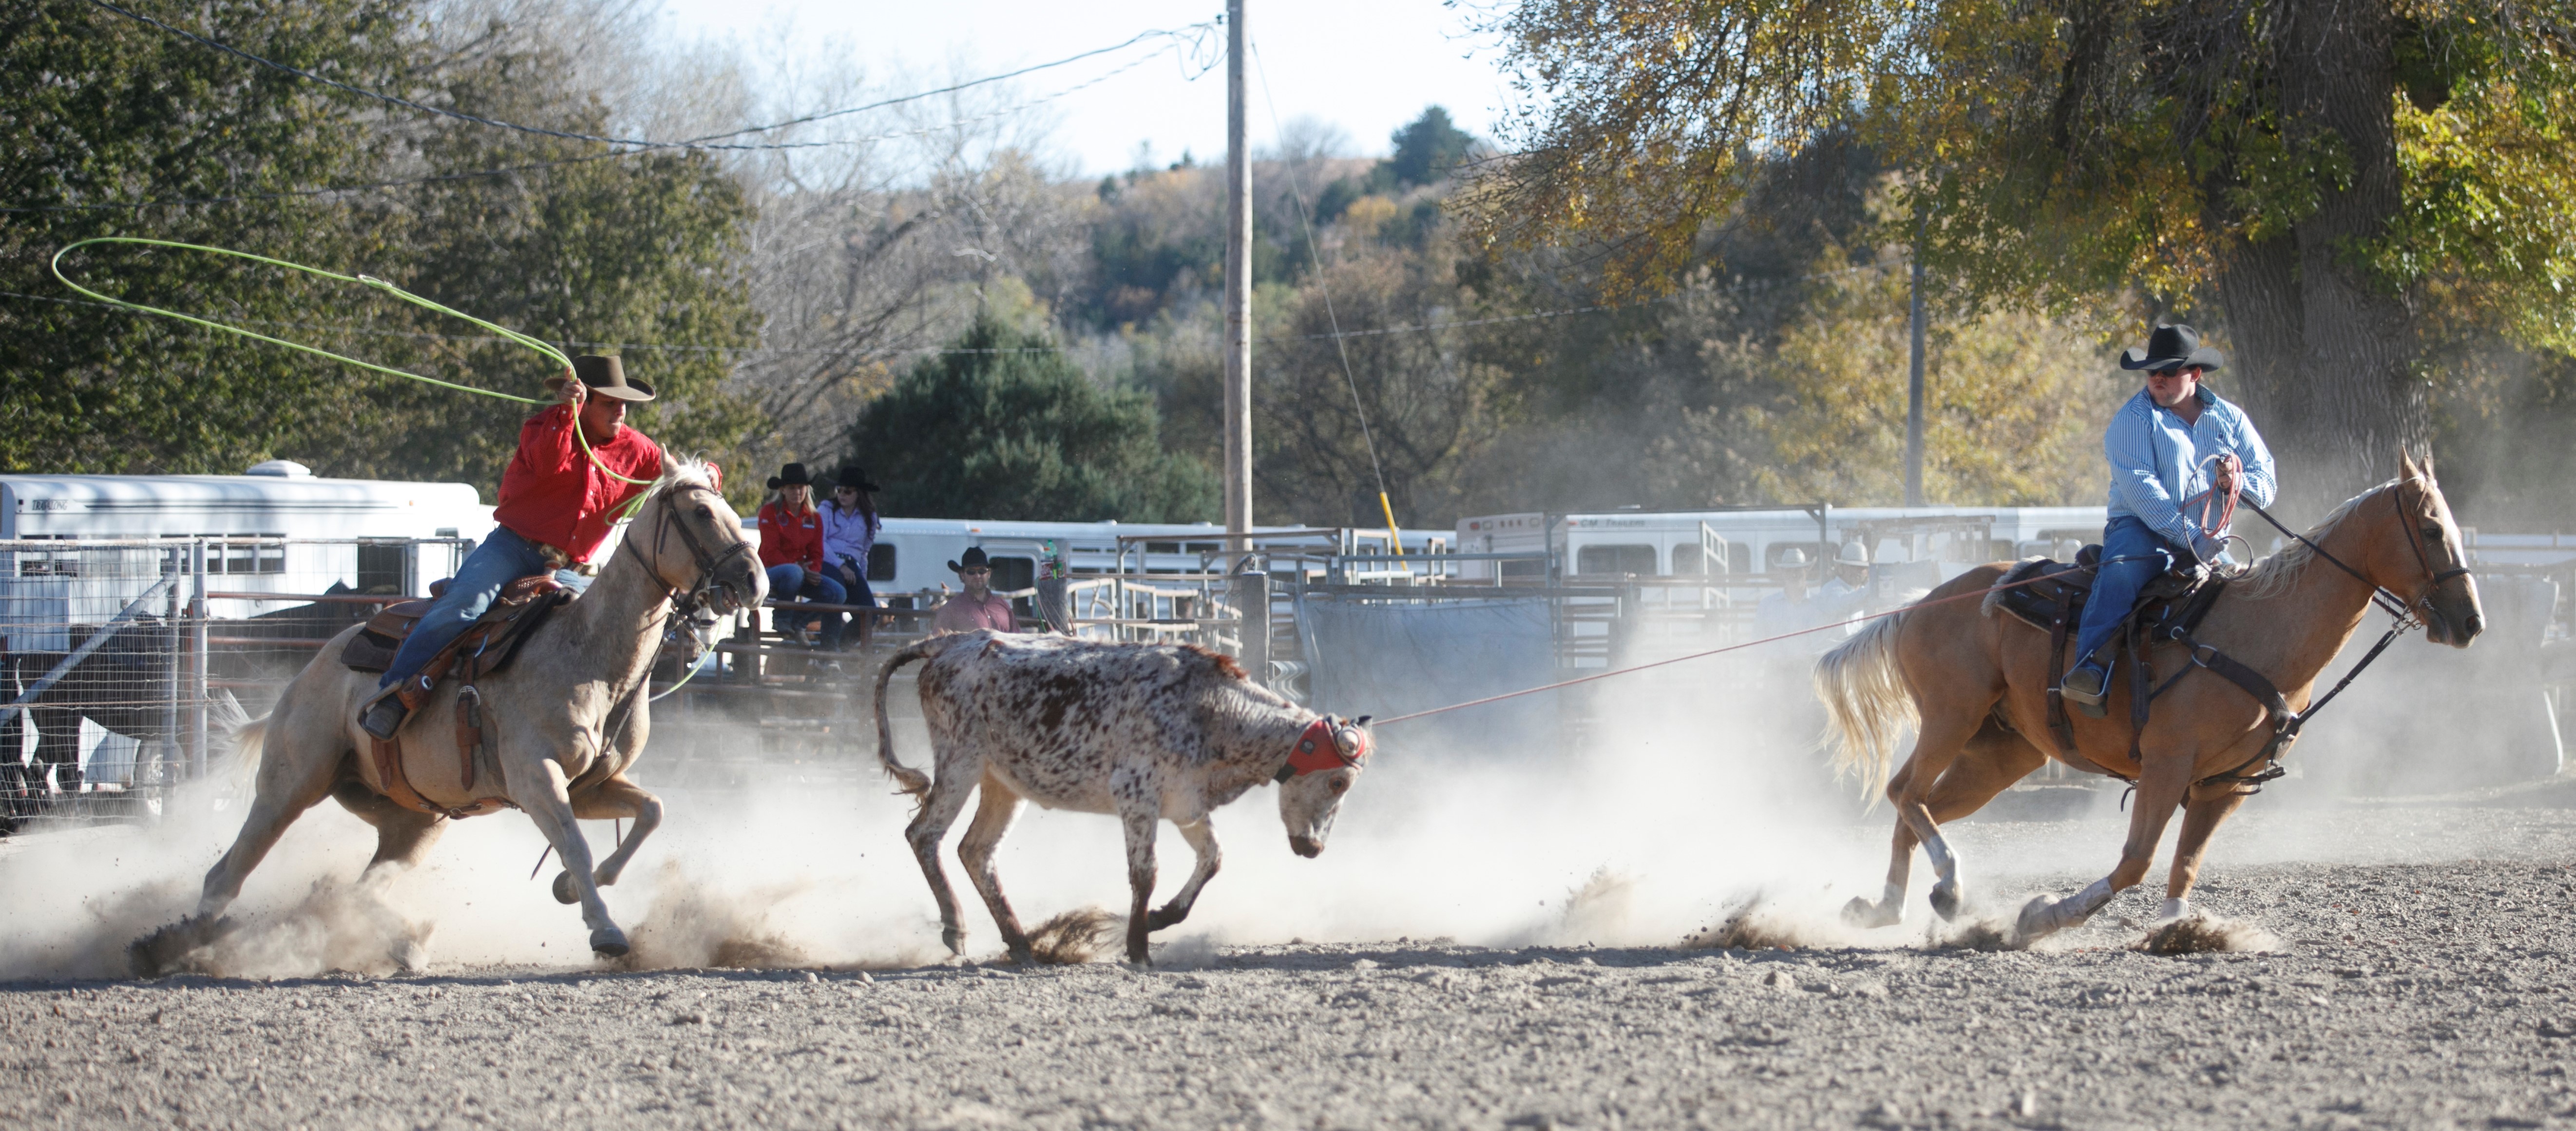 Aggie Rodeo is a popular competition team at NCTA in Curtis. Students like the small community, high quality academics, affordability, and student teams. (Craig Chandler / NCTA Photo)